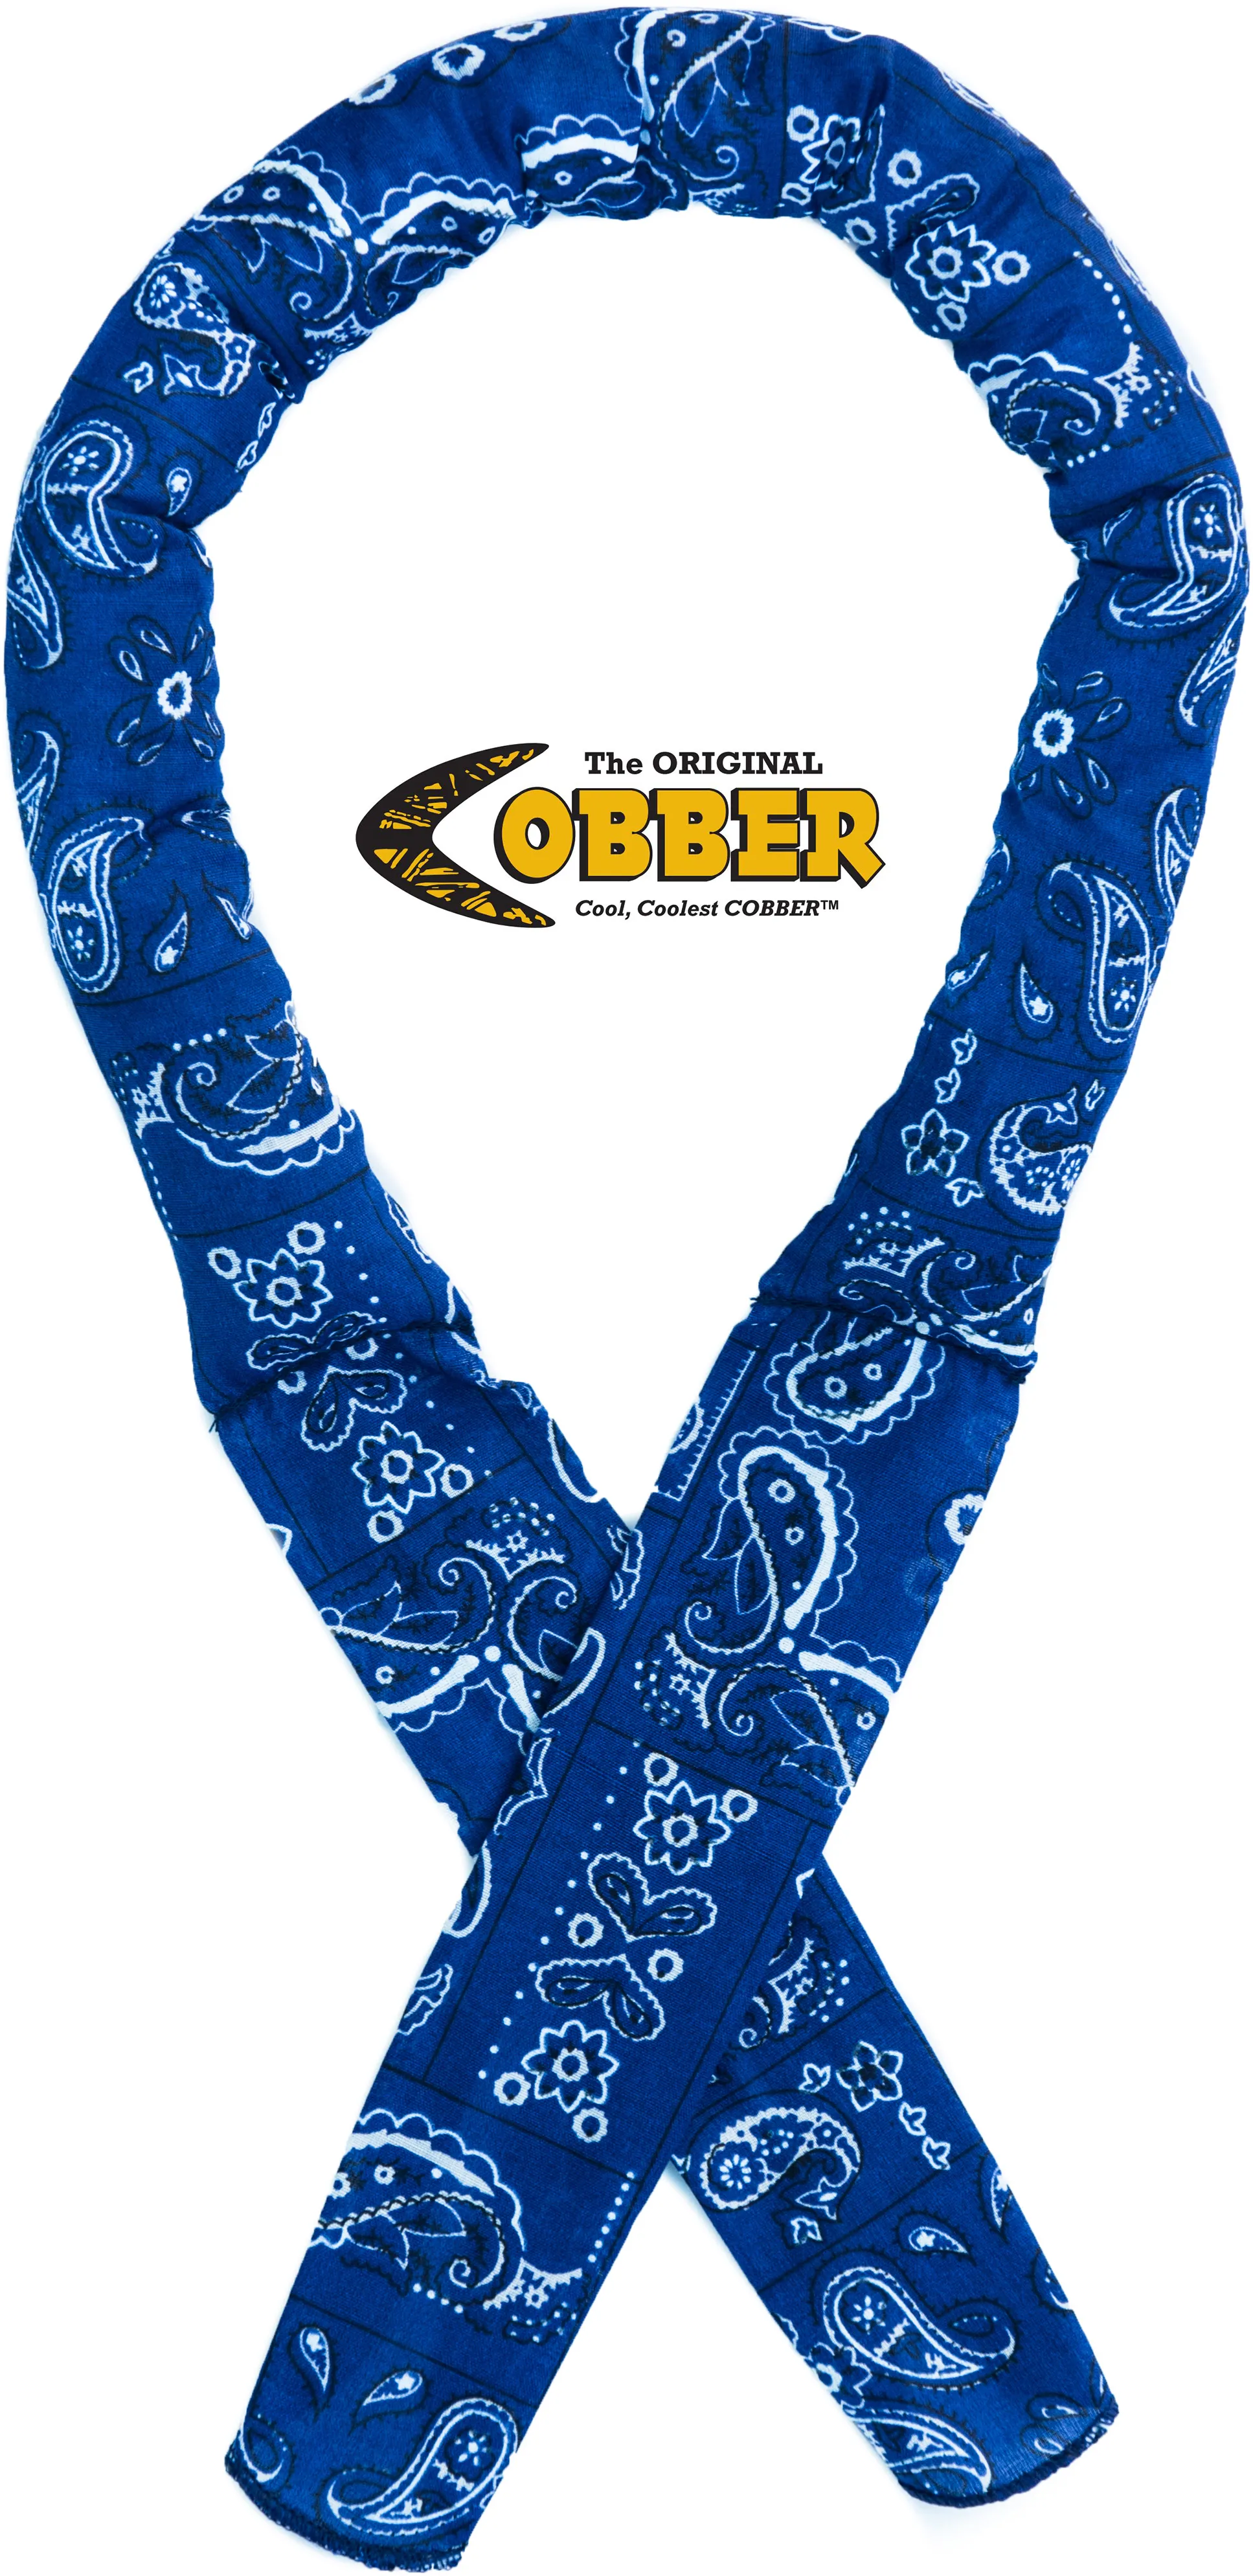 Cobber afkoelsjaal - Blue Paisley